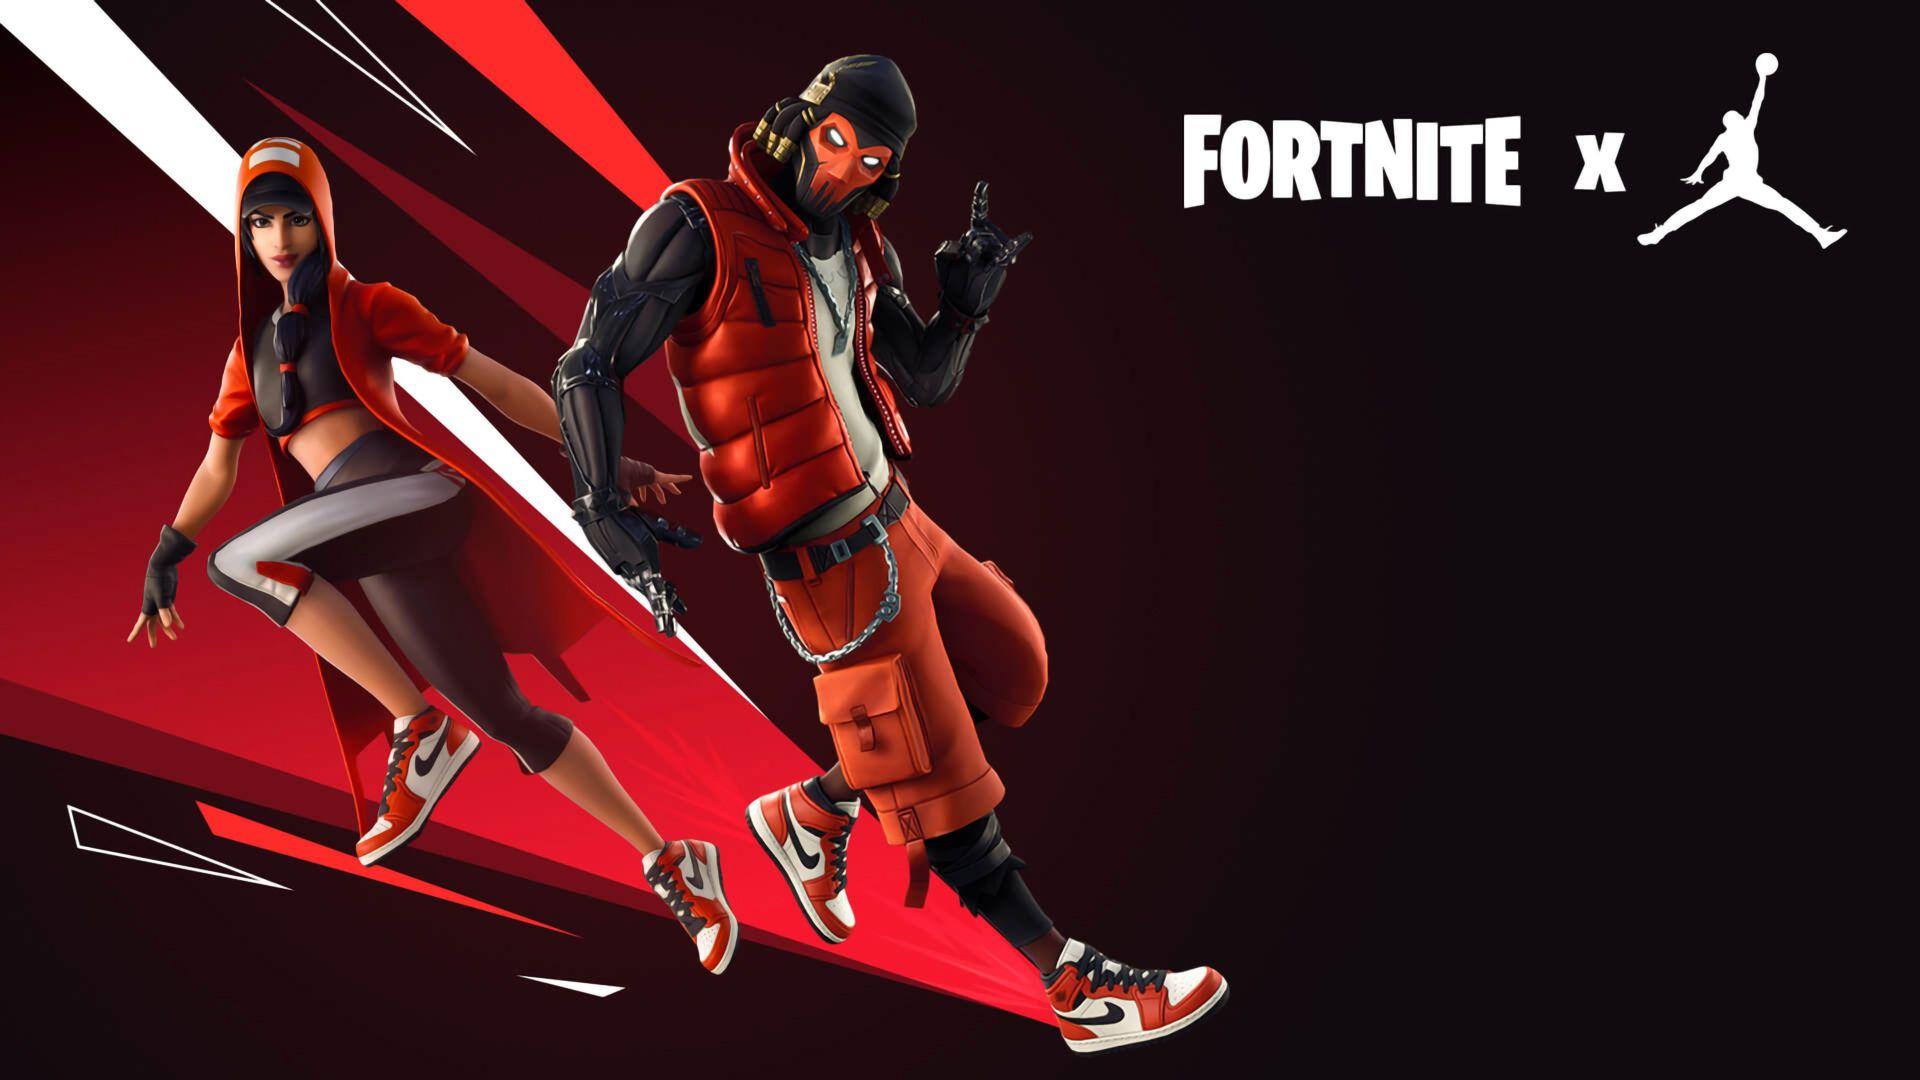 Cool Fortnite Wallpapers Top Free Cool Fortnite Backgrounds Wallpaperaccess All of the fortnite wallpapers bellow have a minimum hd resolution (or 1920x1080 for the tech guys) and are easily downloadable by clicking the image and saving it. cool fortnite wallpapers top free